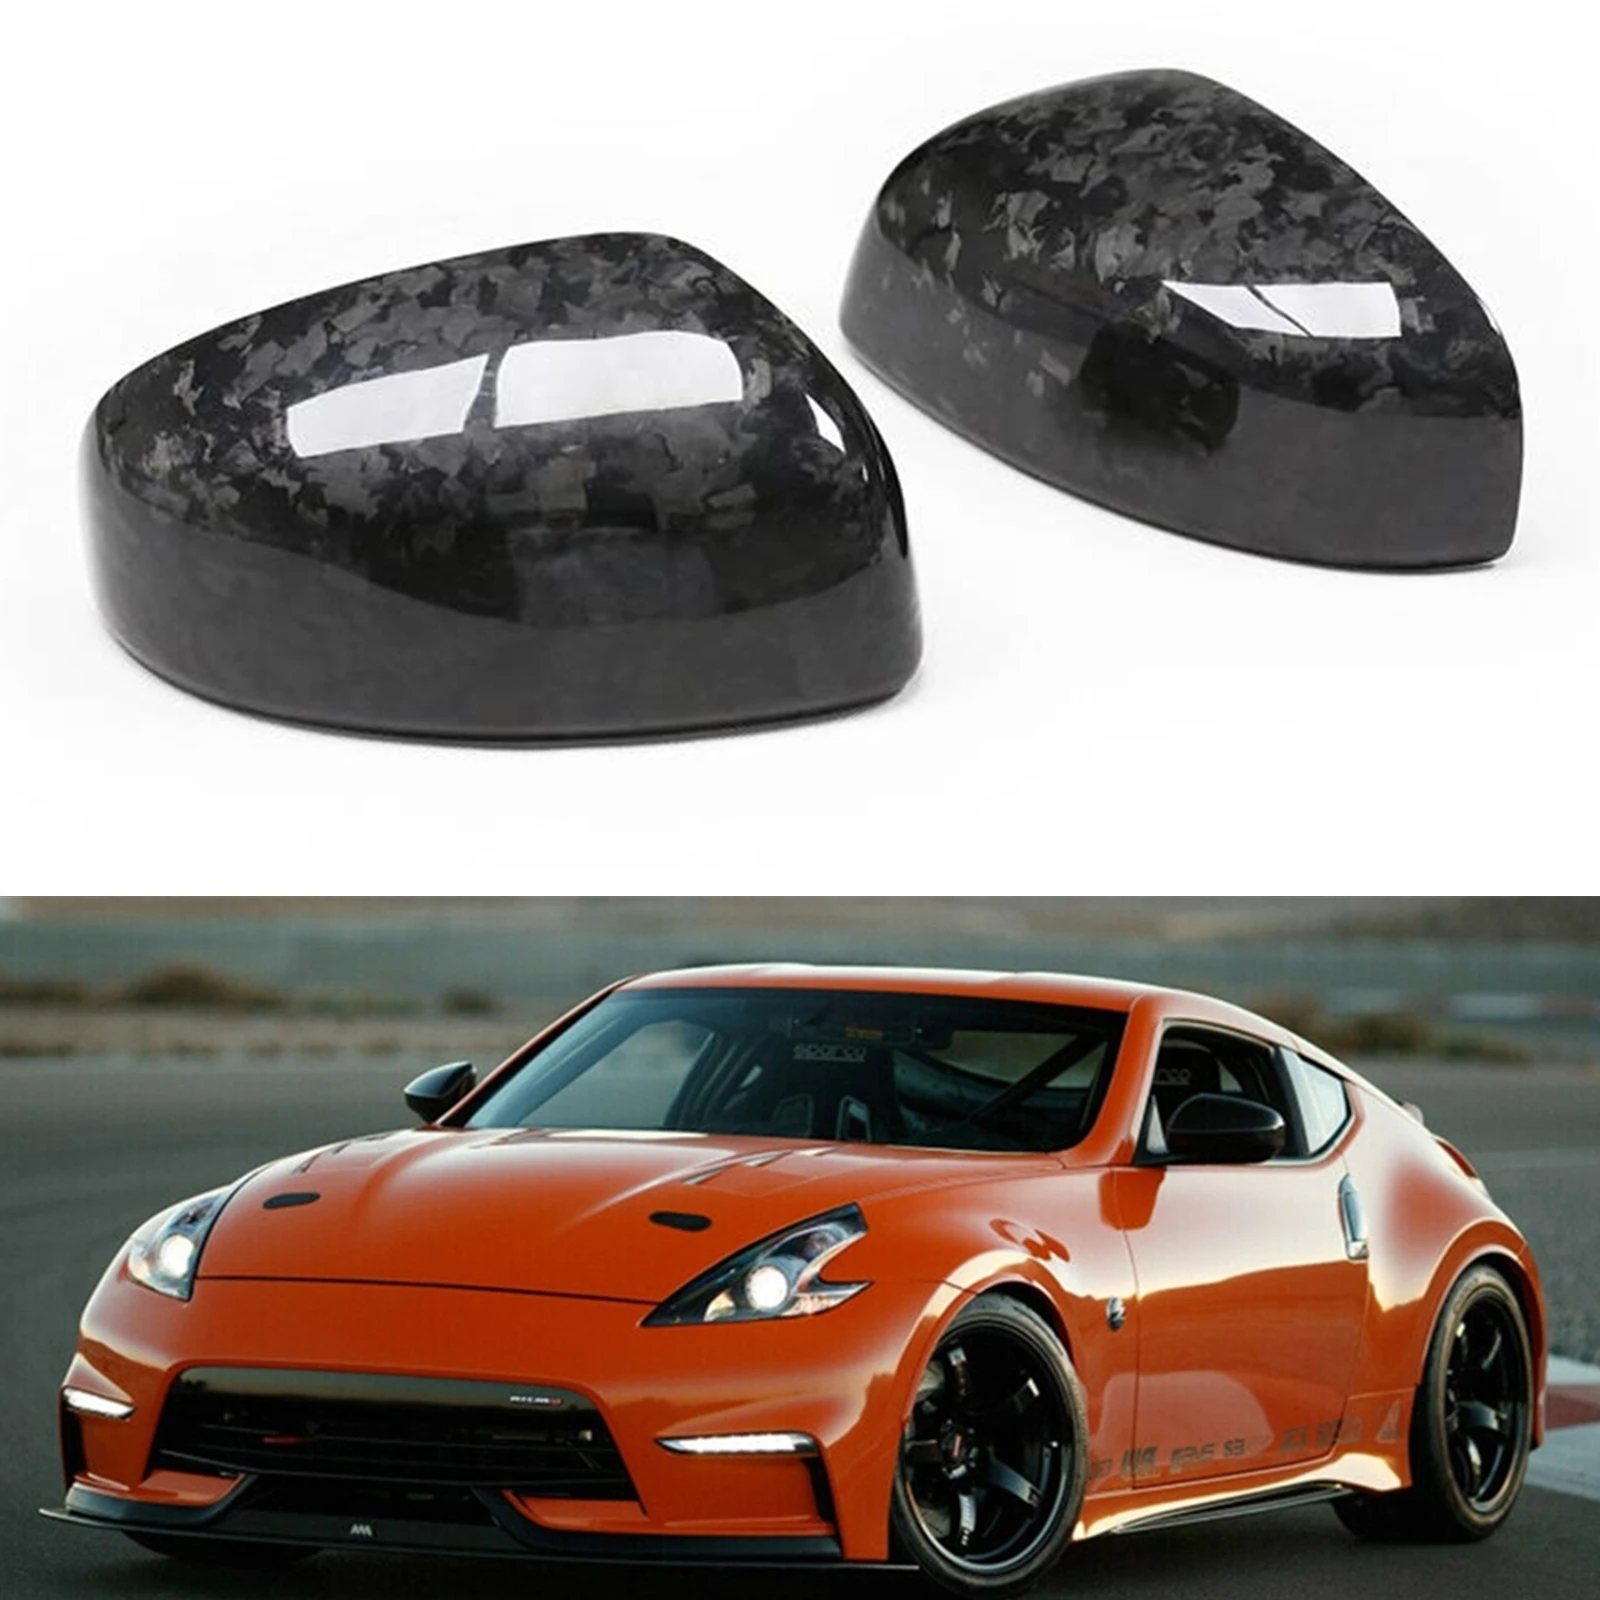 Add-on Type GaofeiLTF Carbon Fiber Mirror Cap Covers Fits for 2009-2019 Nissan 370Z Z34 all models 